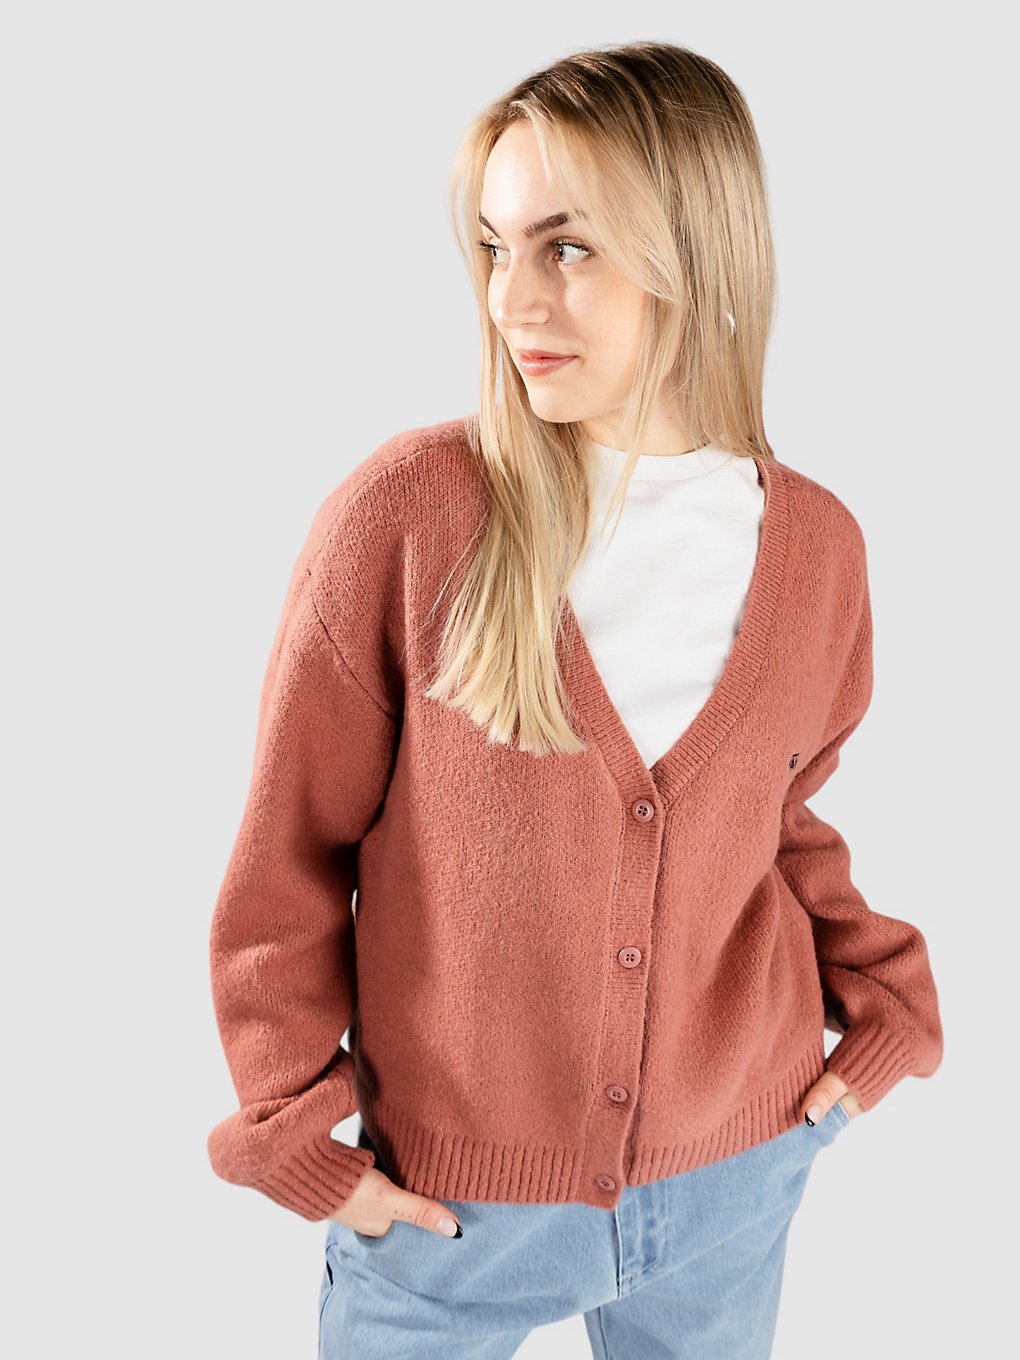 Vans Hadley Relaxed Strickjacke Pullover whithered rose kaufen